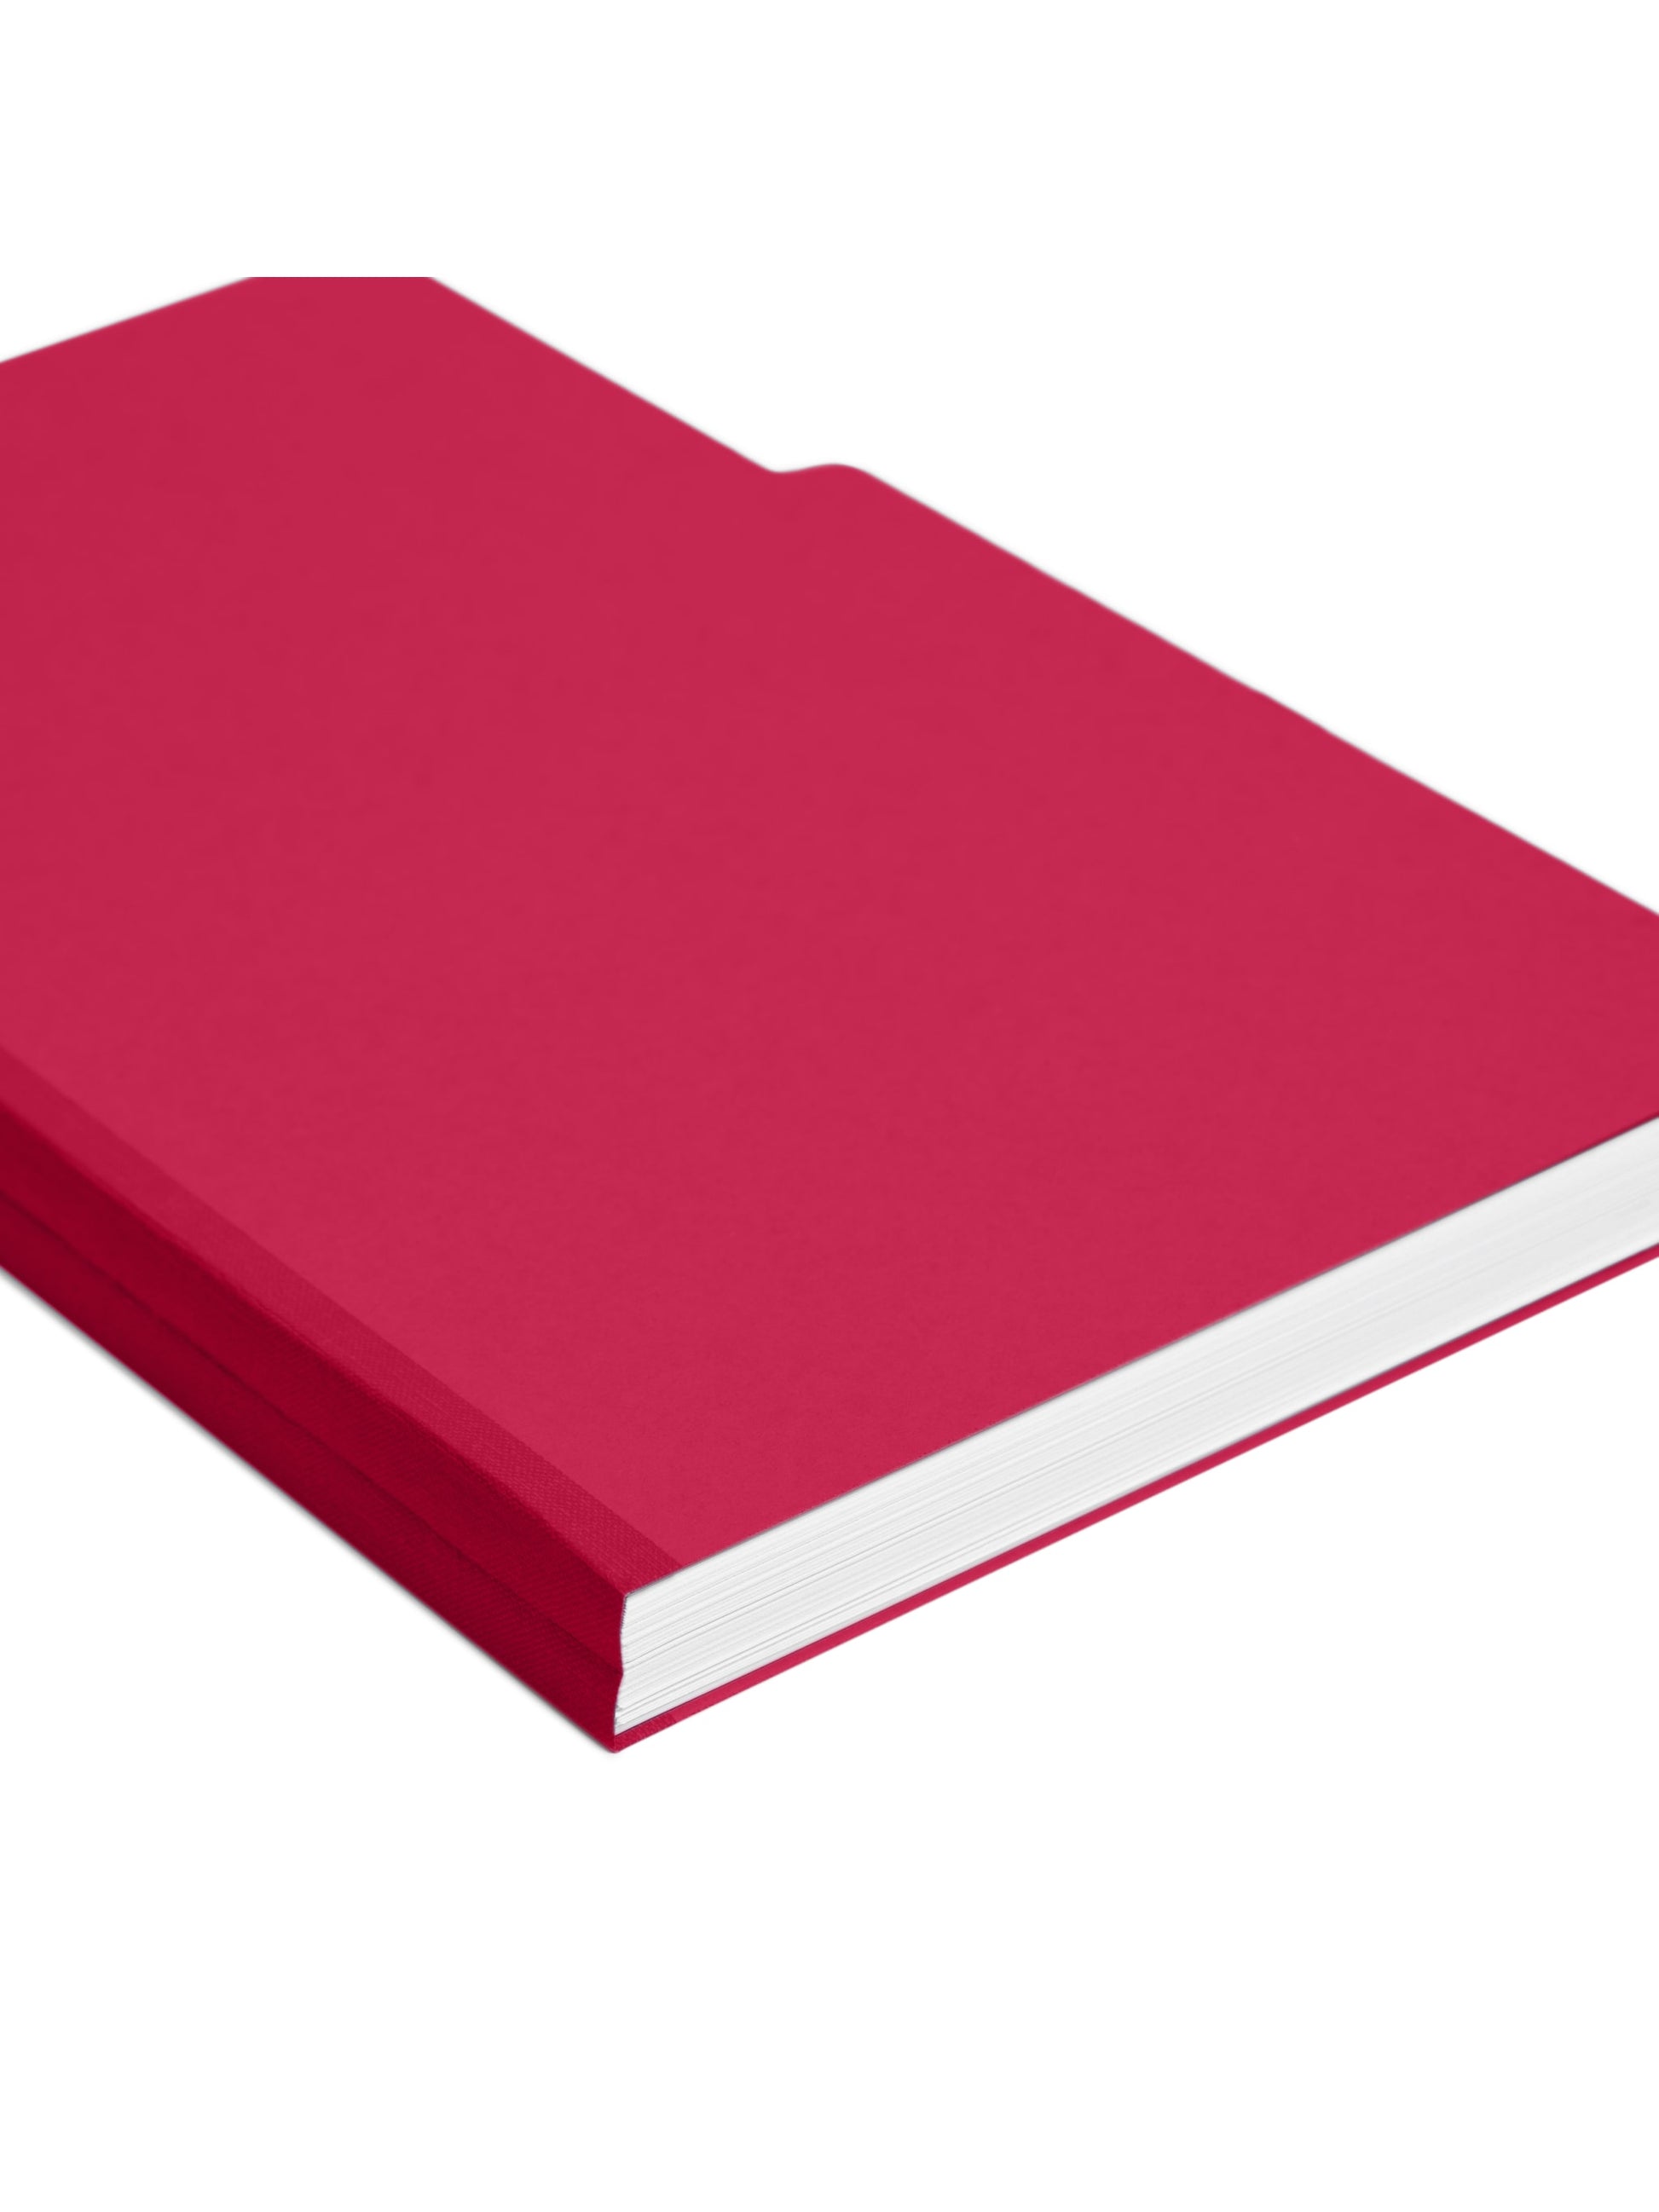 Pressboard File Folder, 1 inch Expansion, 1/3-Cut Tab, Bright Red Color, Legal Size, Set of 25, 086486225380